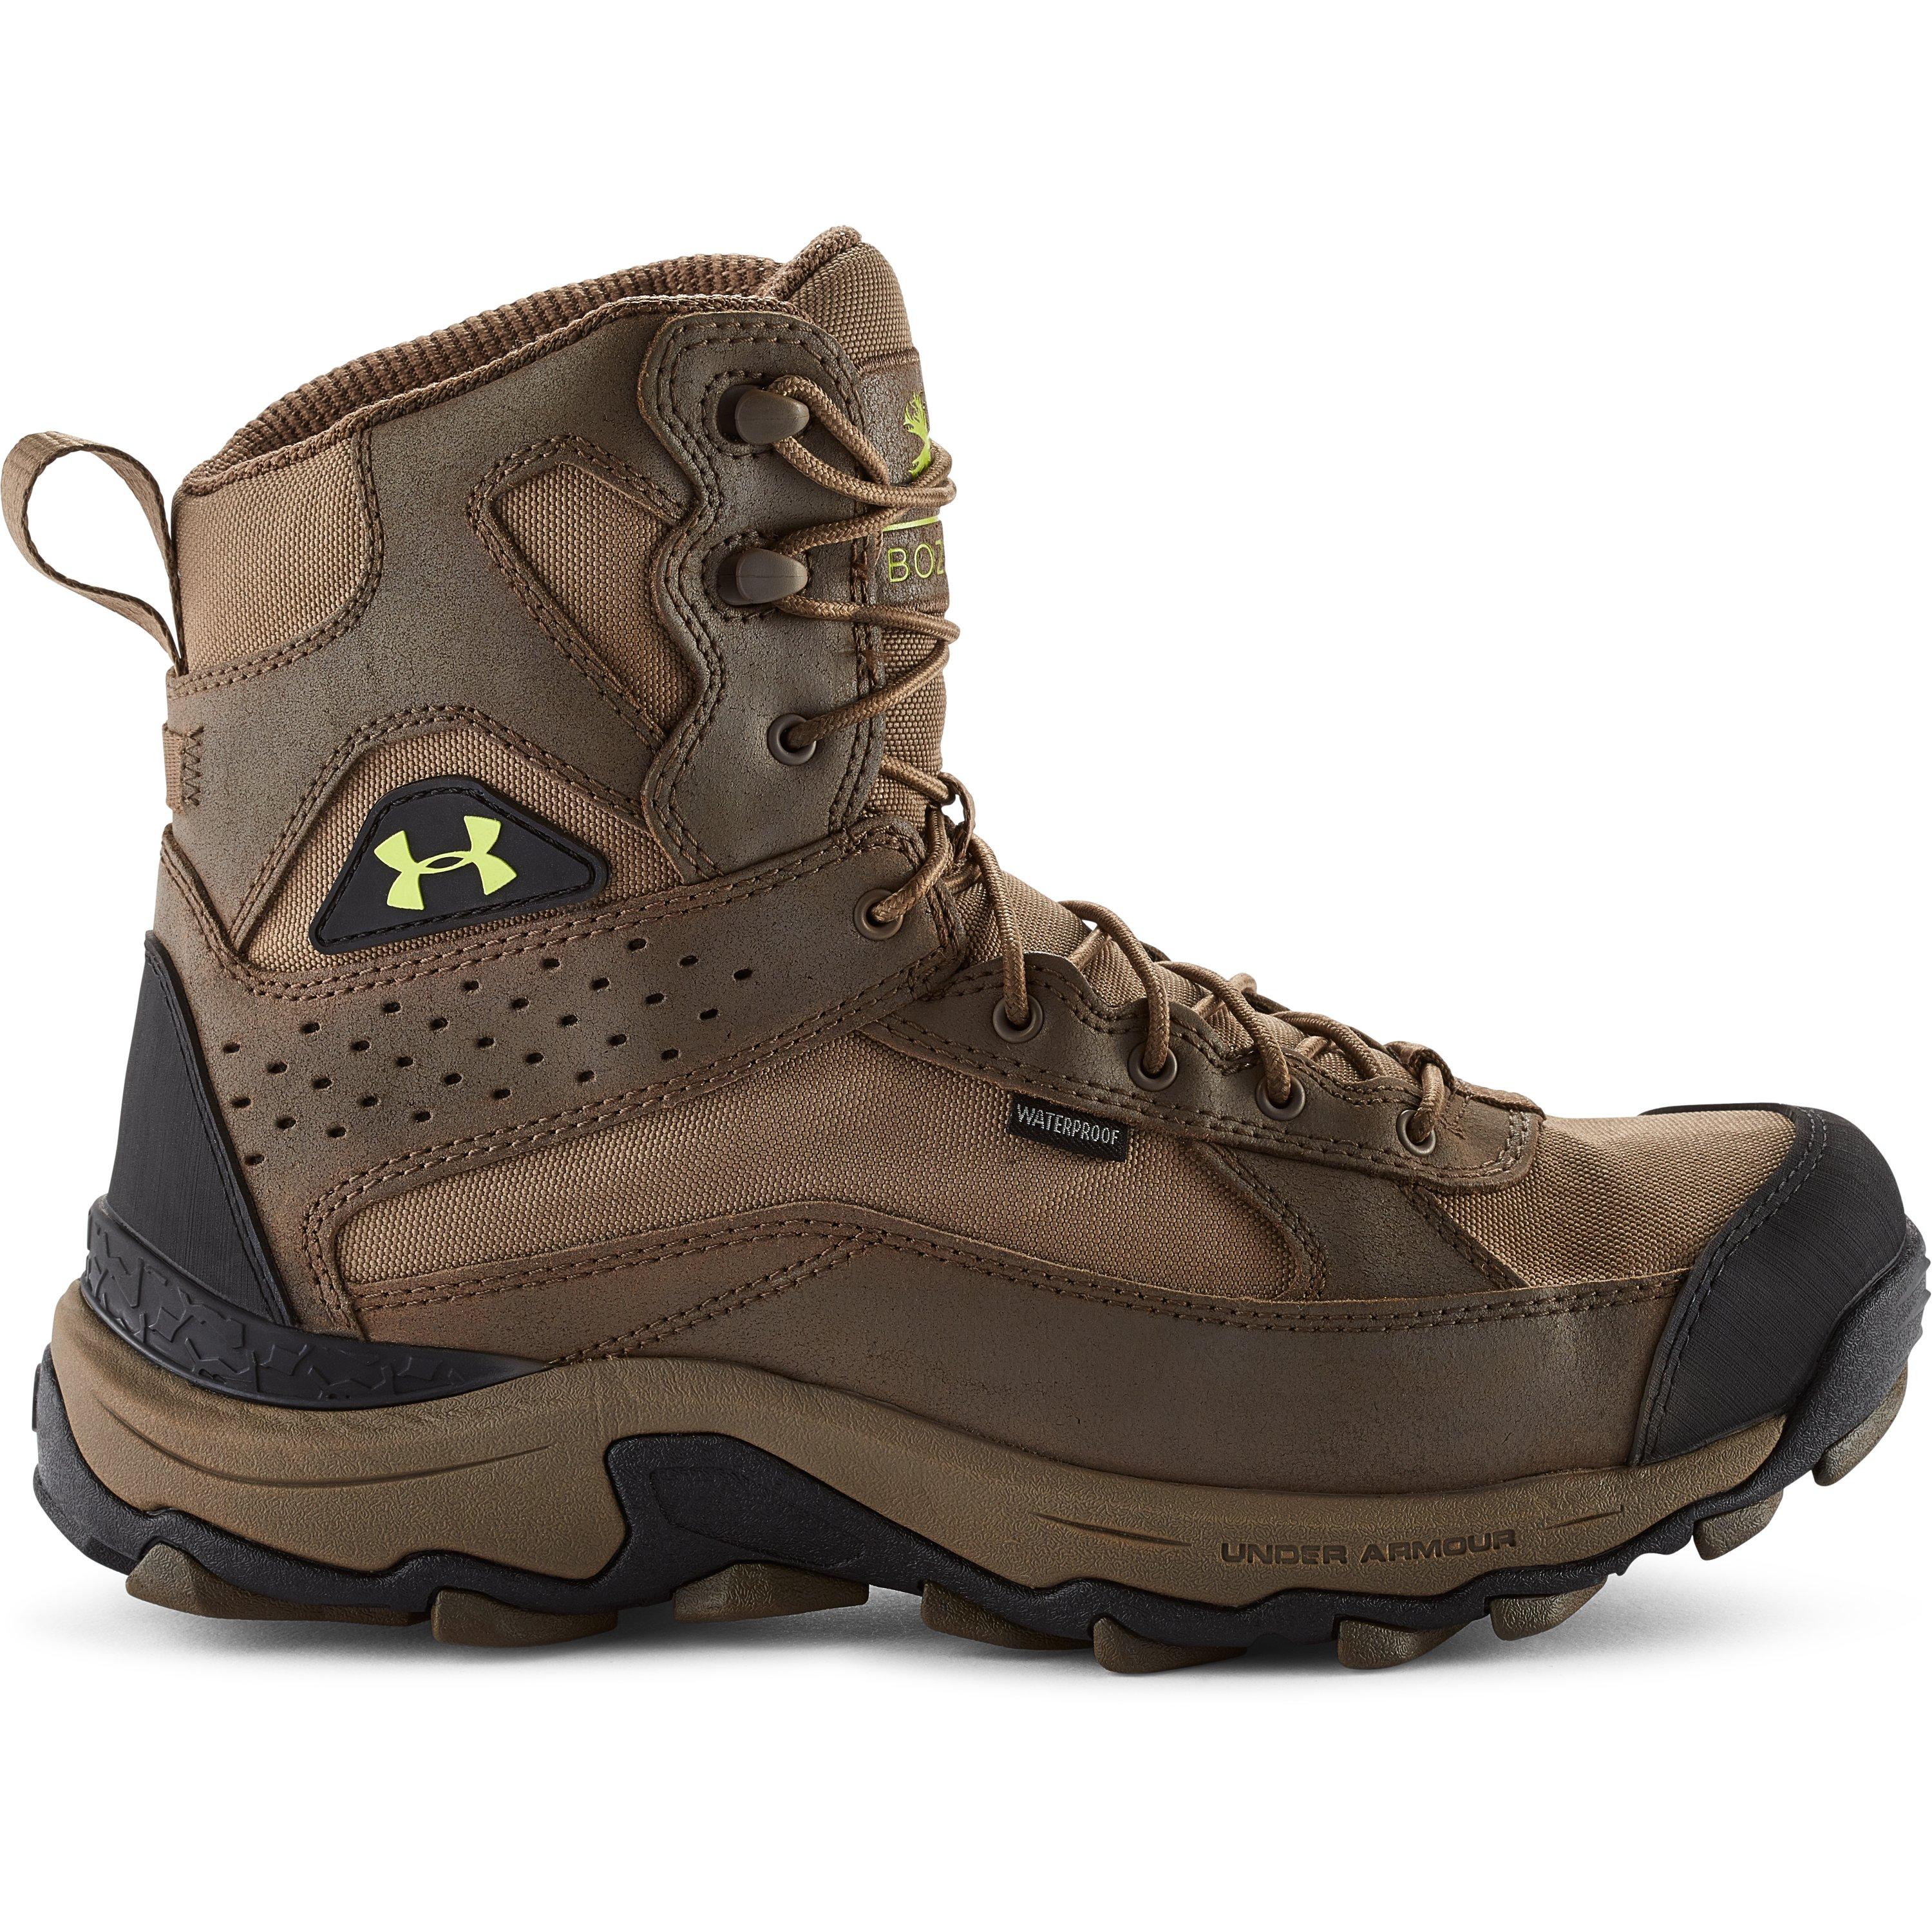 Under Armour Men's Ua Speed Freek Bozeman Hunting Boots – Wide (4e) in ...